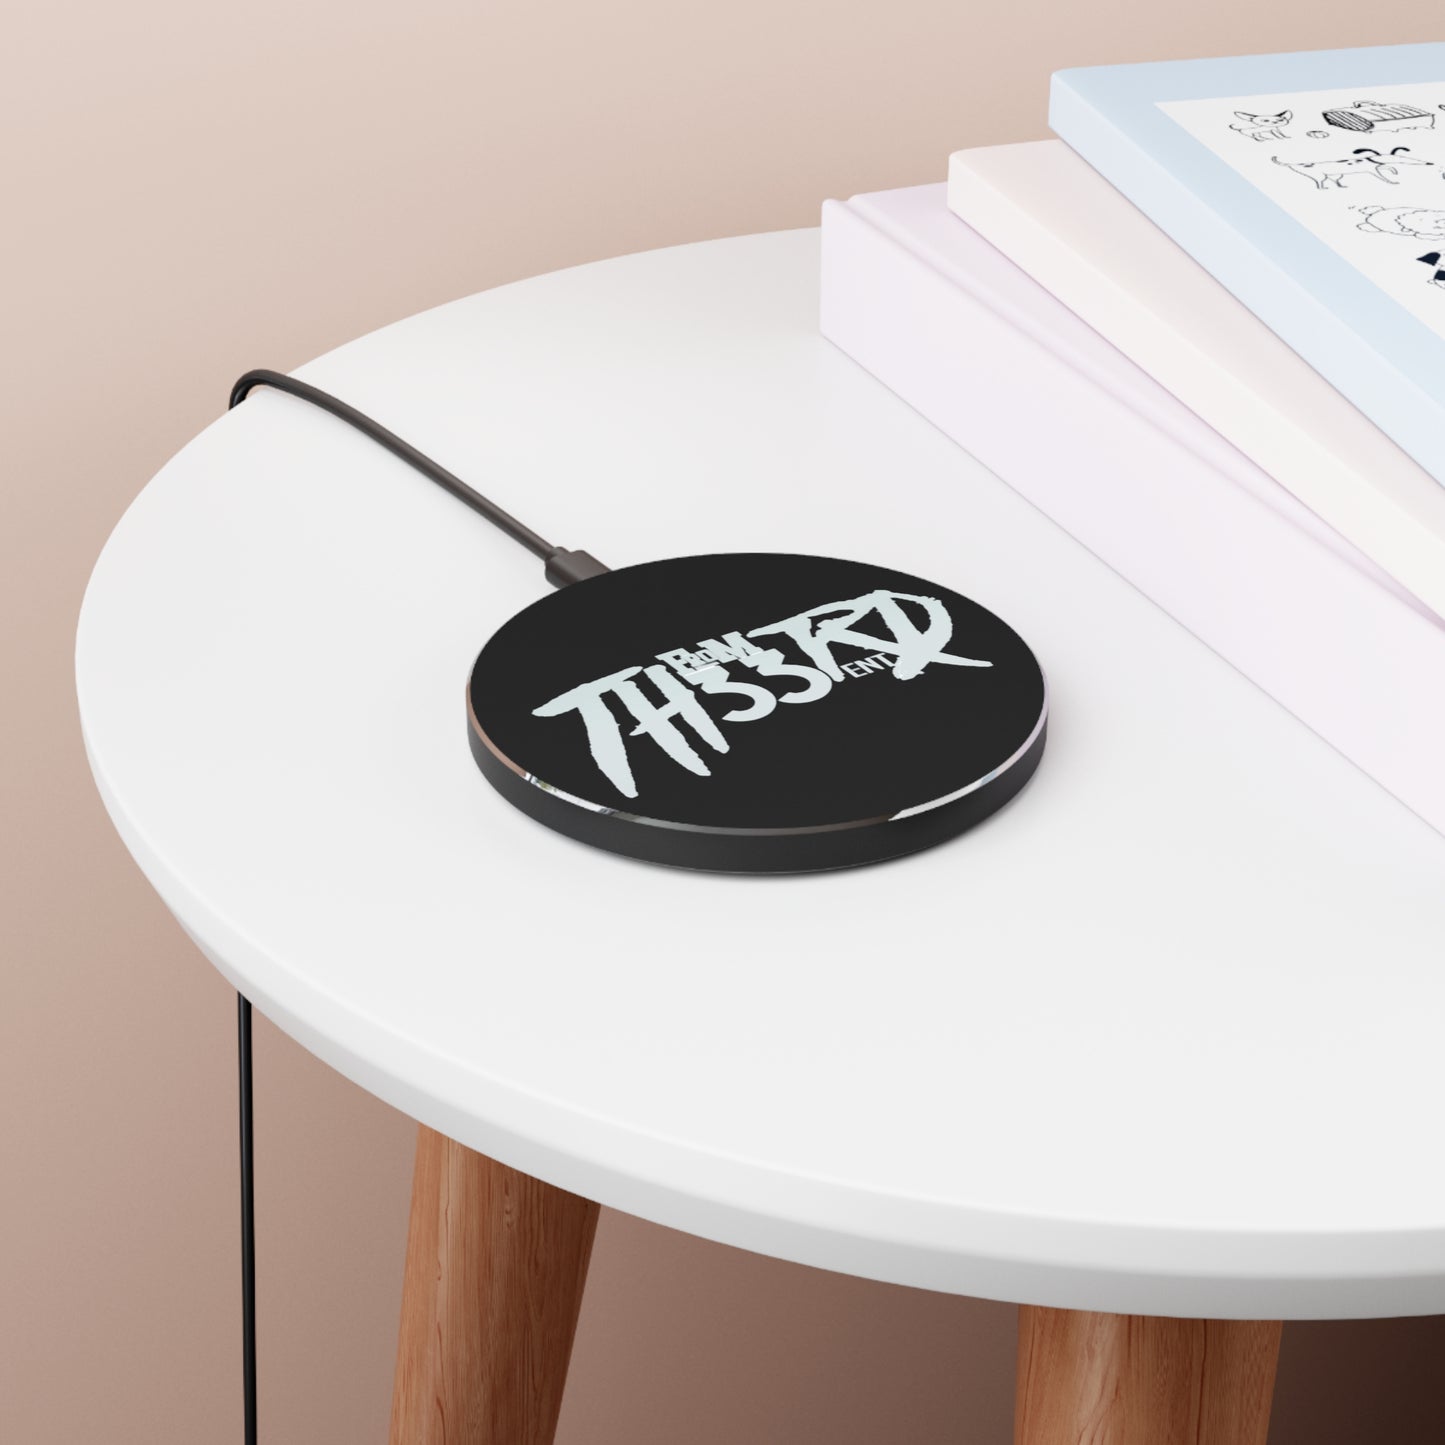 Fromth33rdENT Wireless Charger